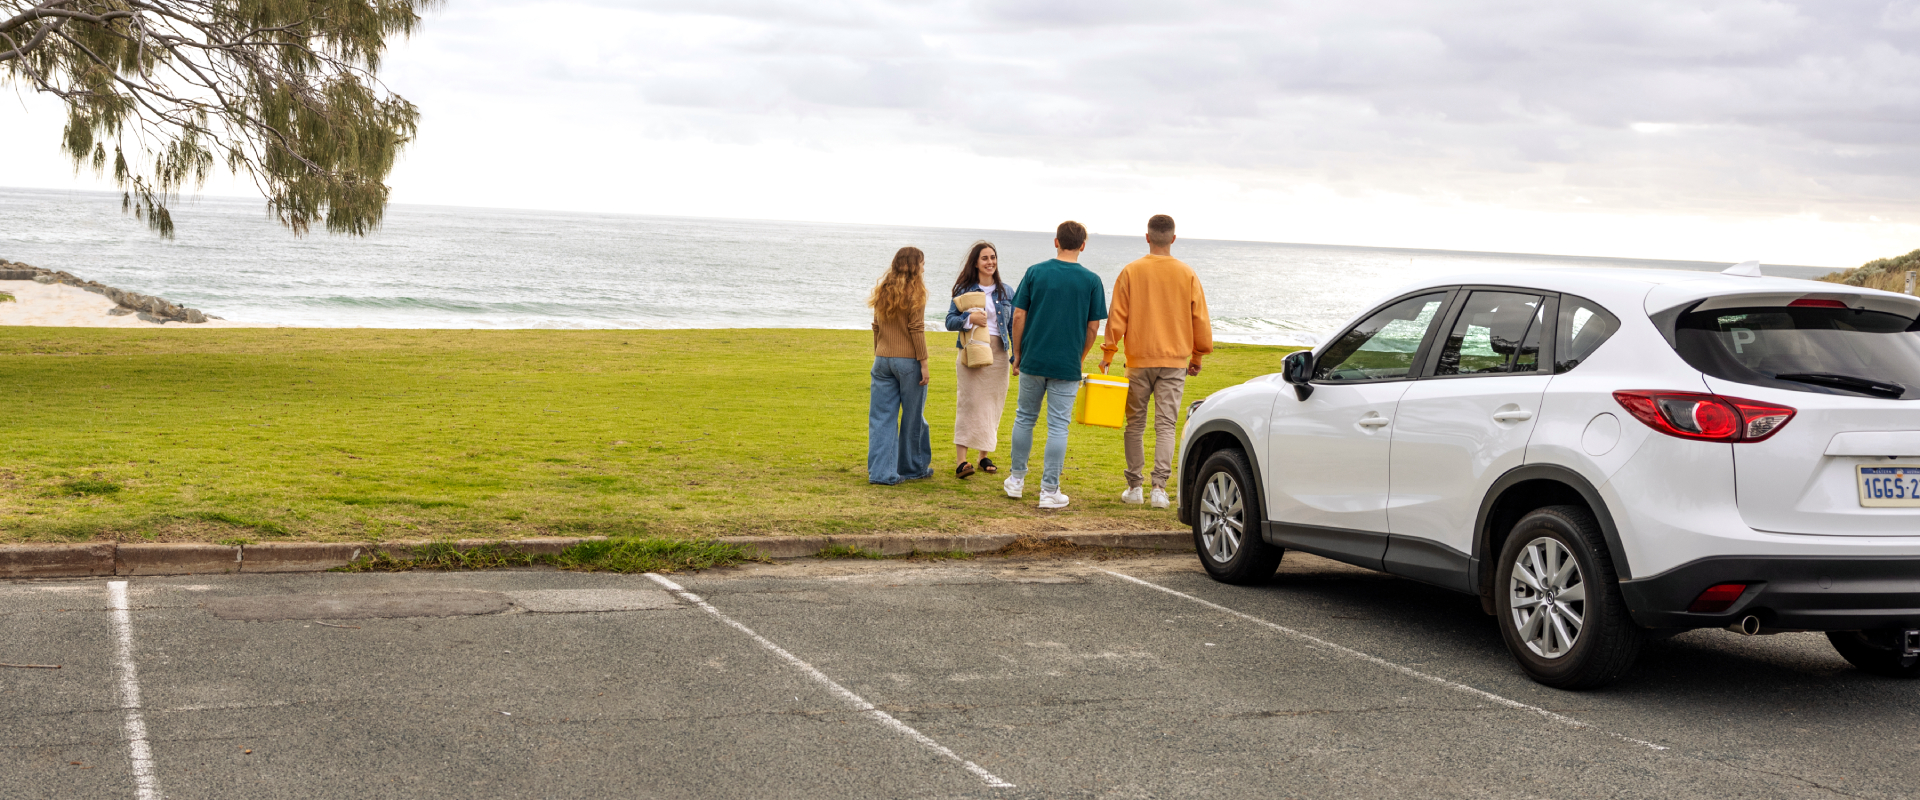 Four young people walking towards the beach from their car